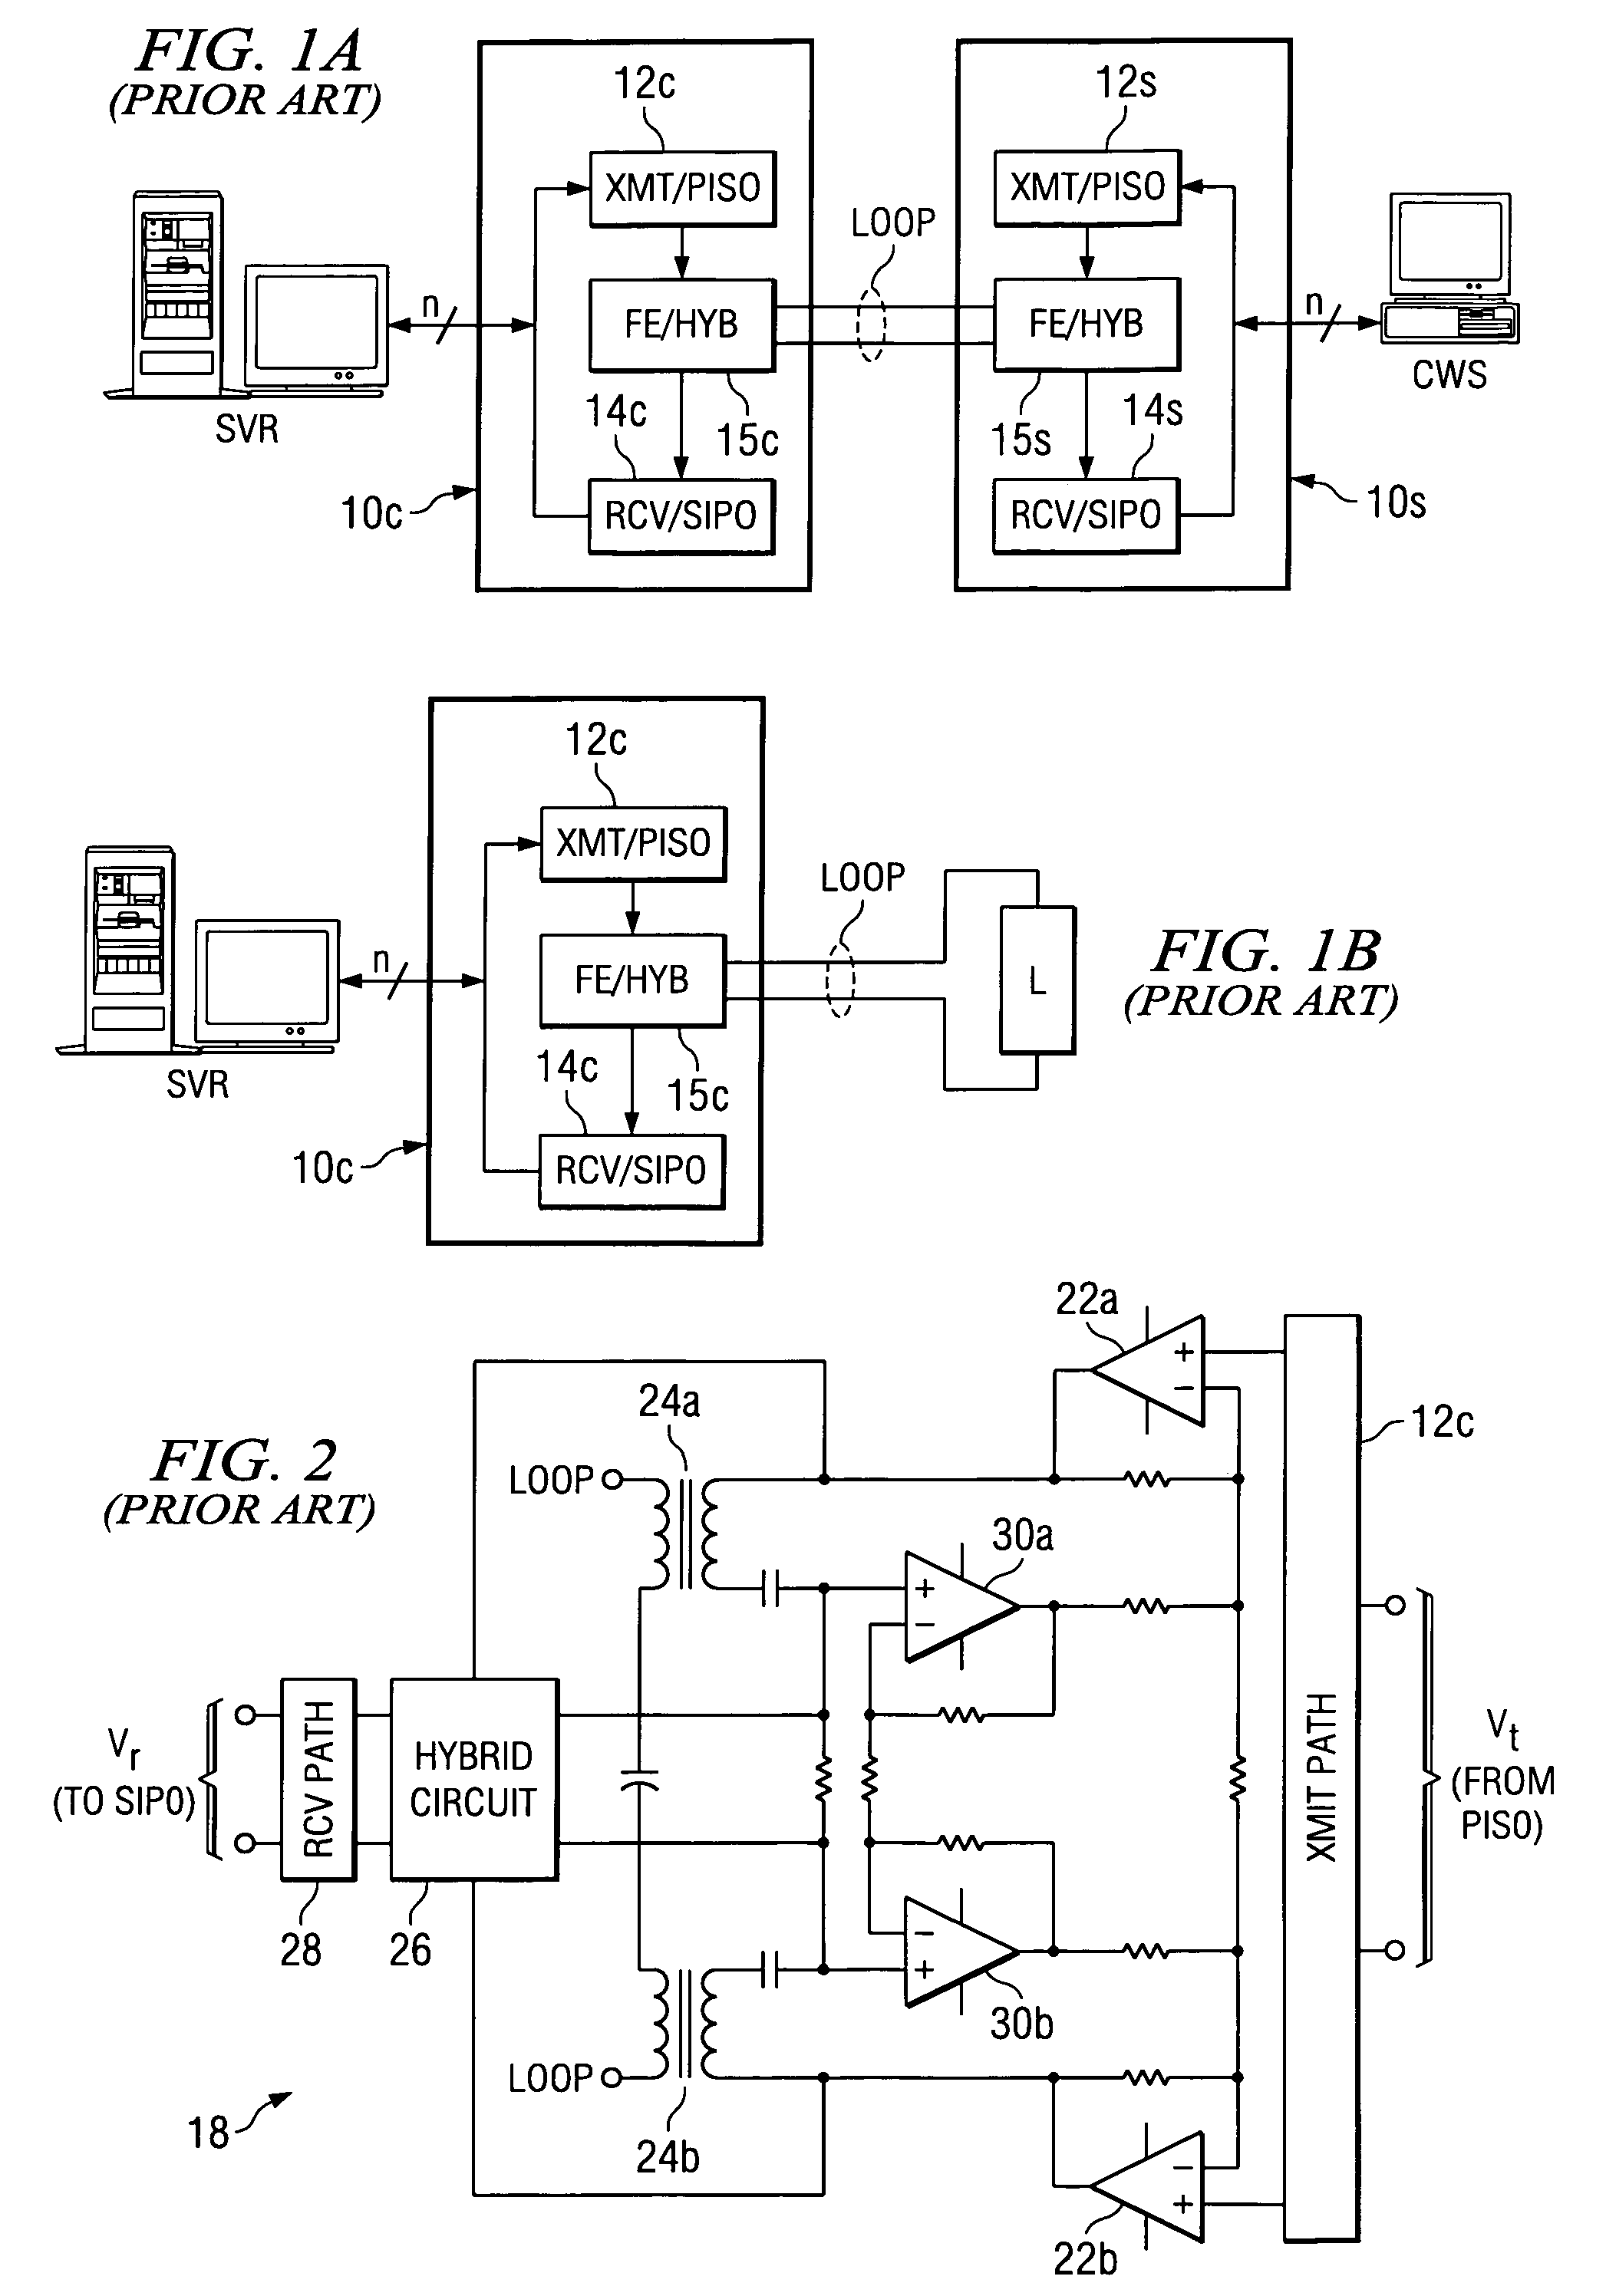 Single-ended loop test circuitry in a central office DSL modem